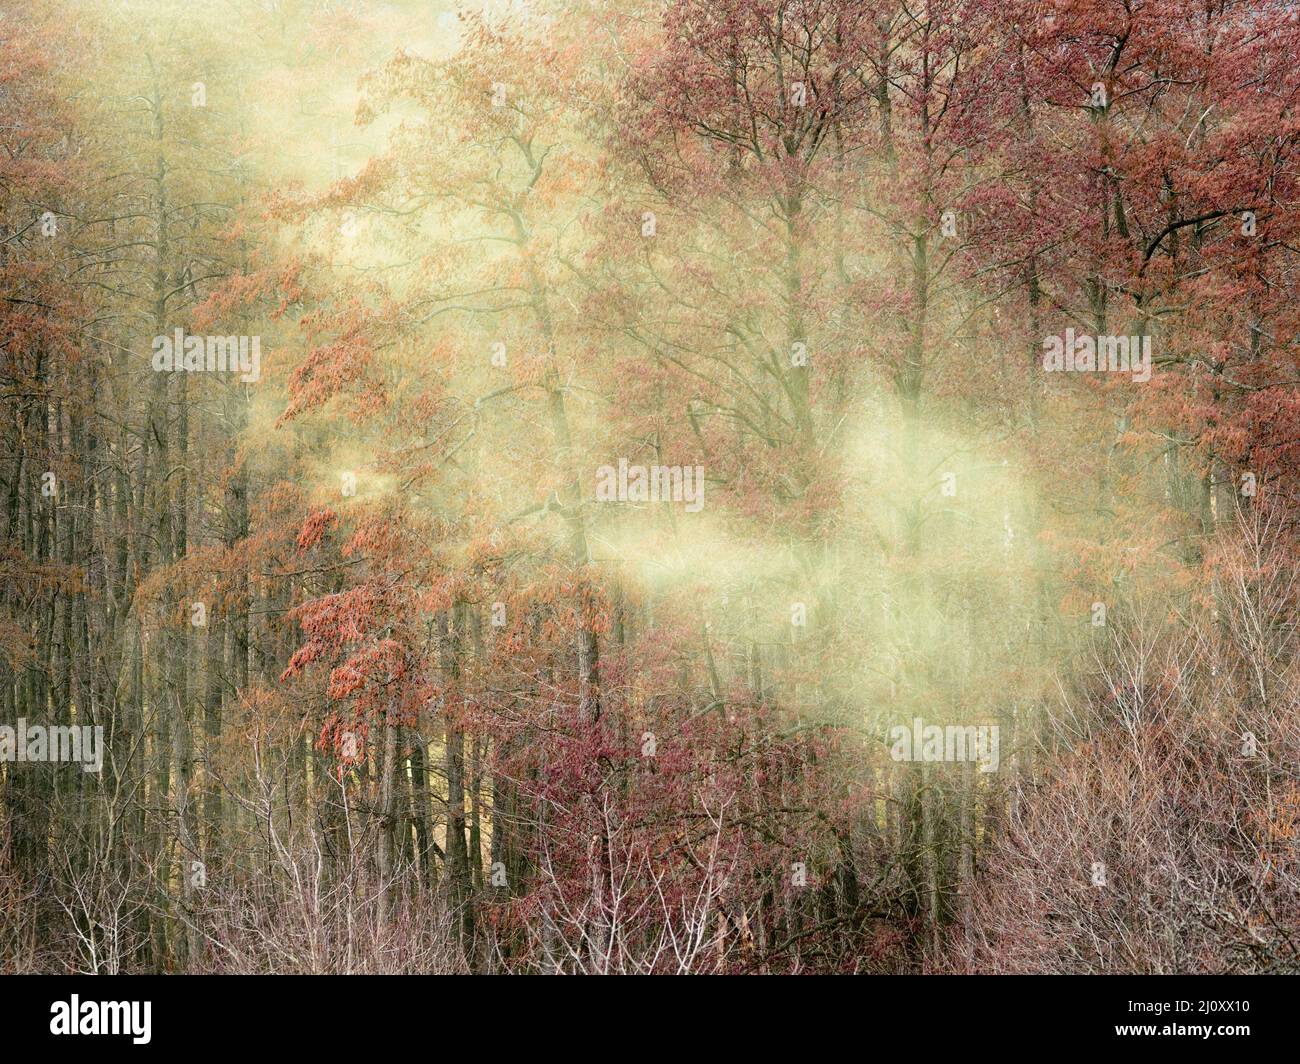 Bloom at a tree hazel forest massive pollen spread by the wind causing allergies Stock Photo